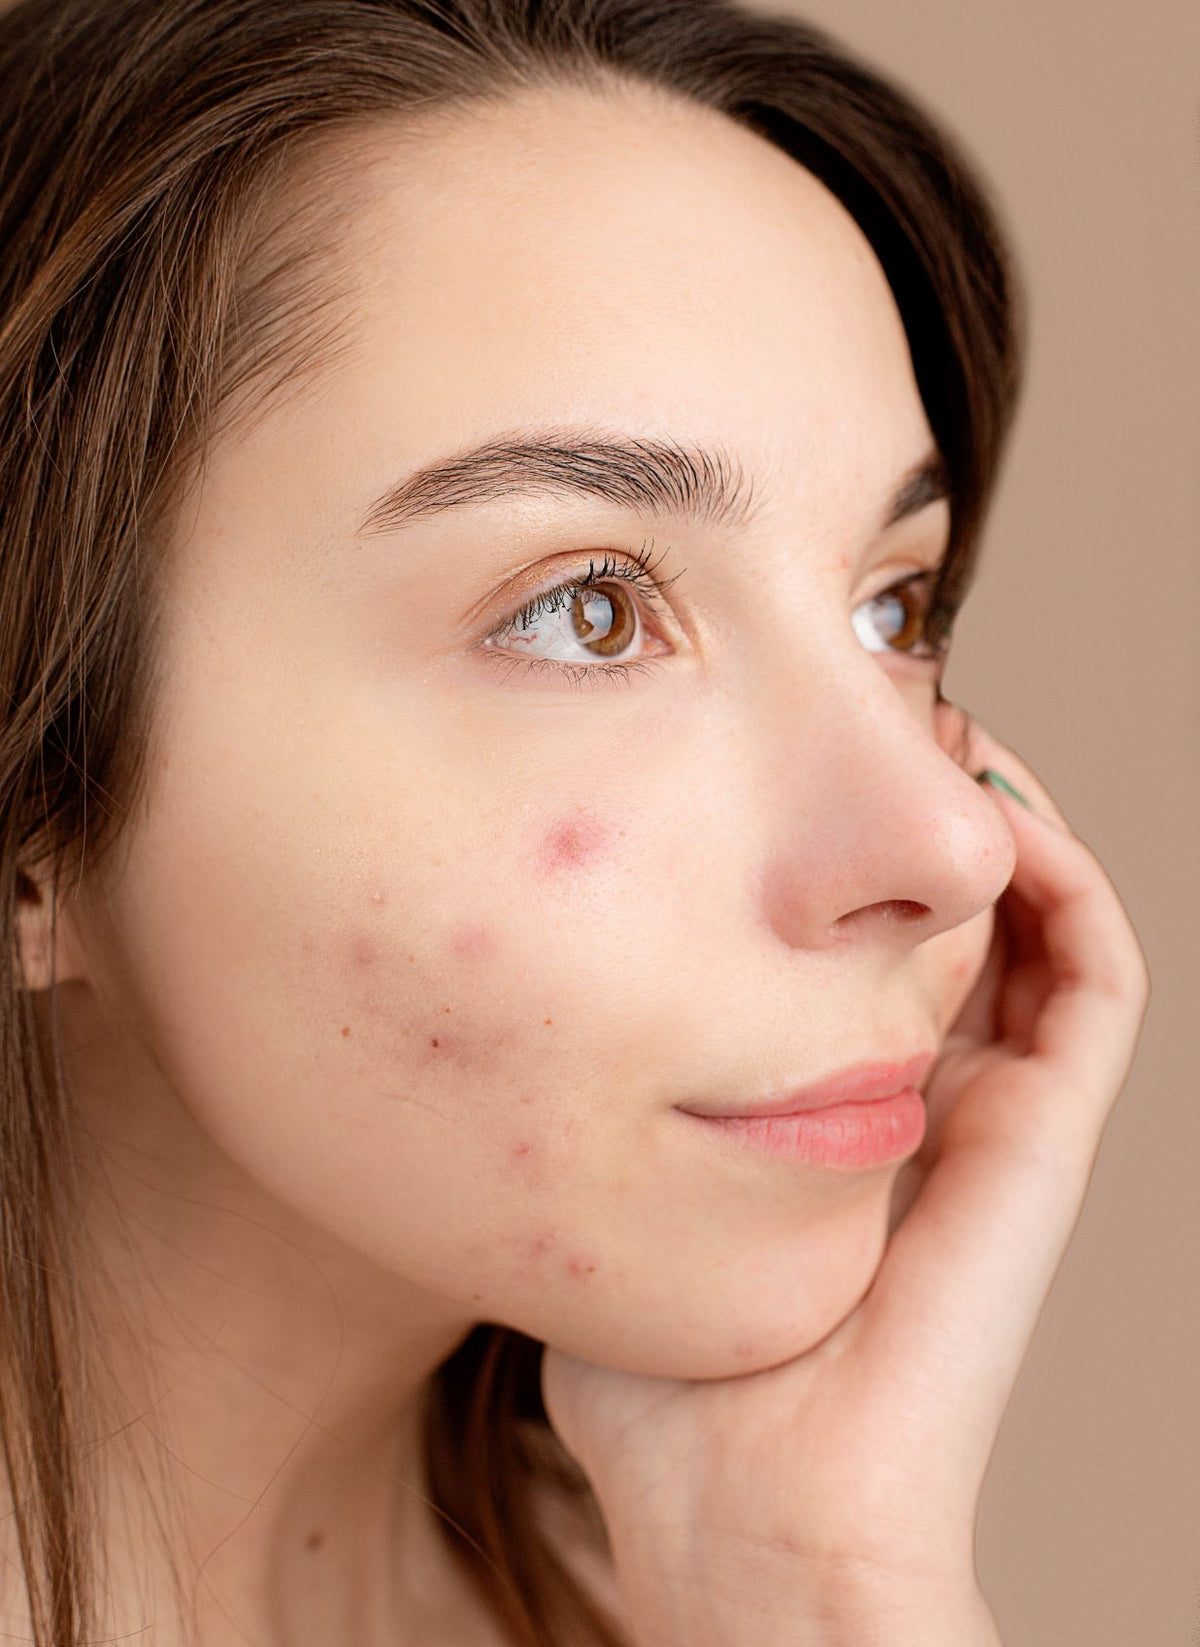 Best acne supplements and skinvite 